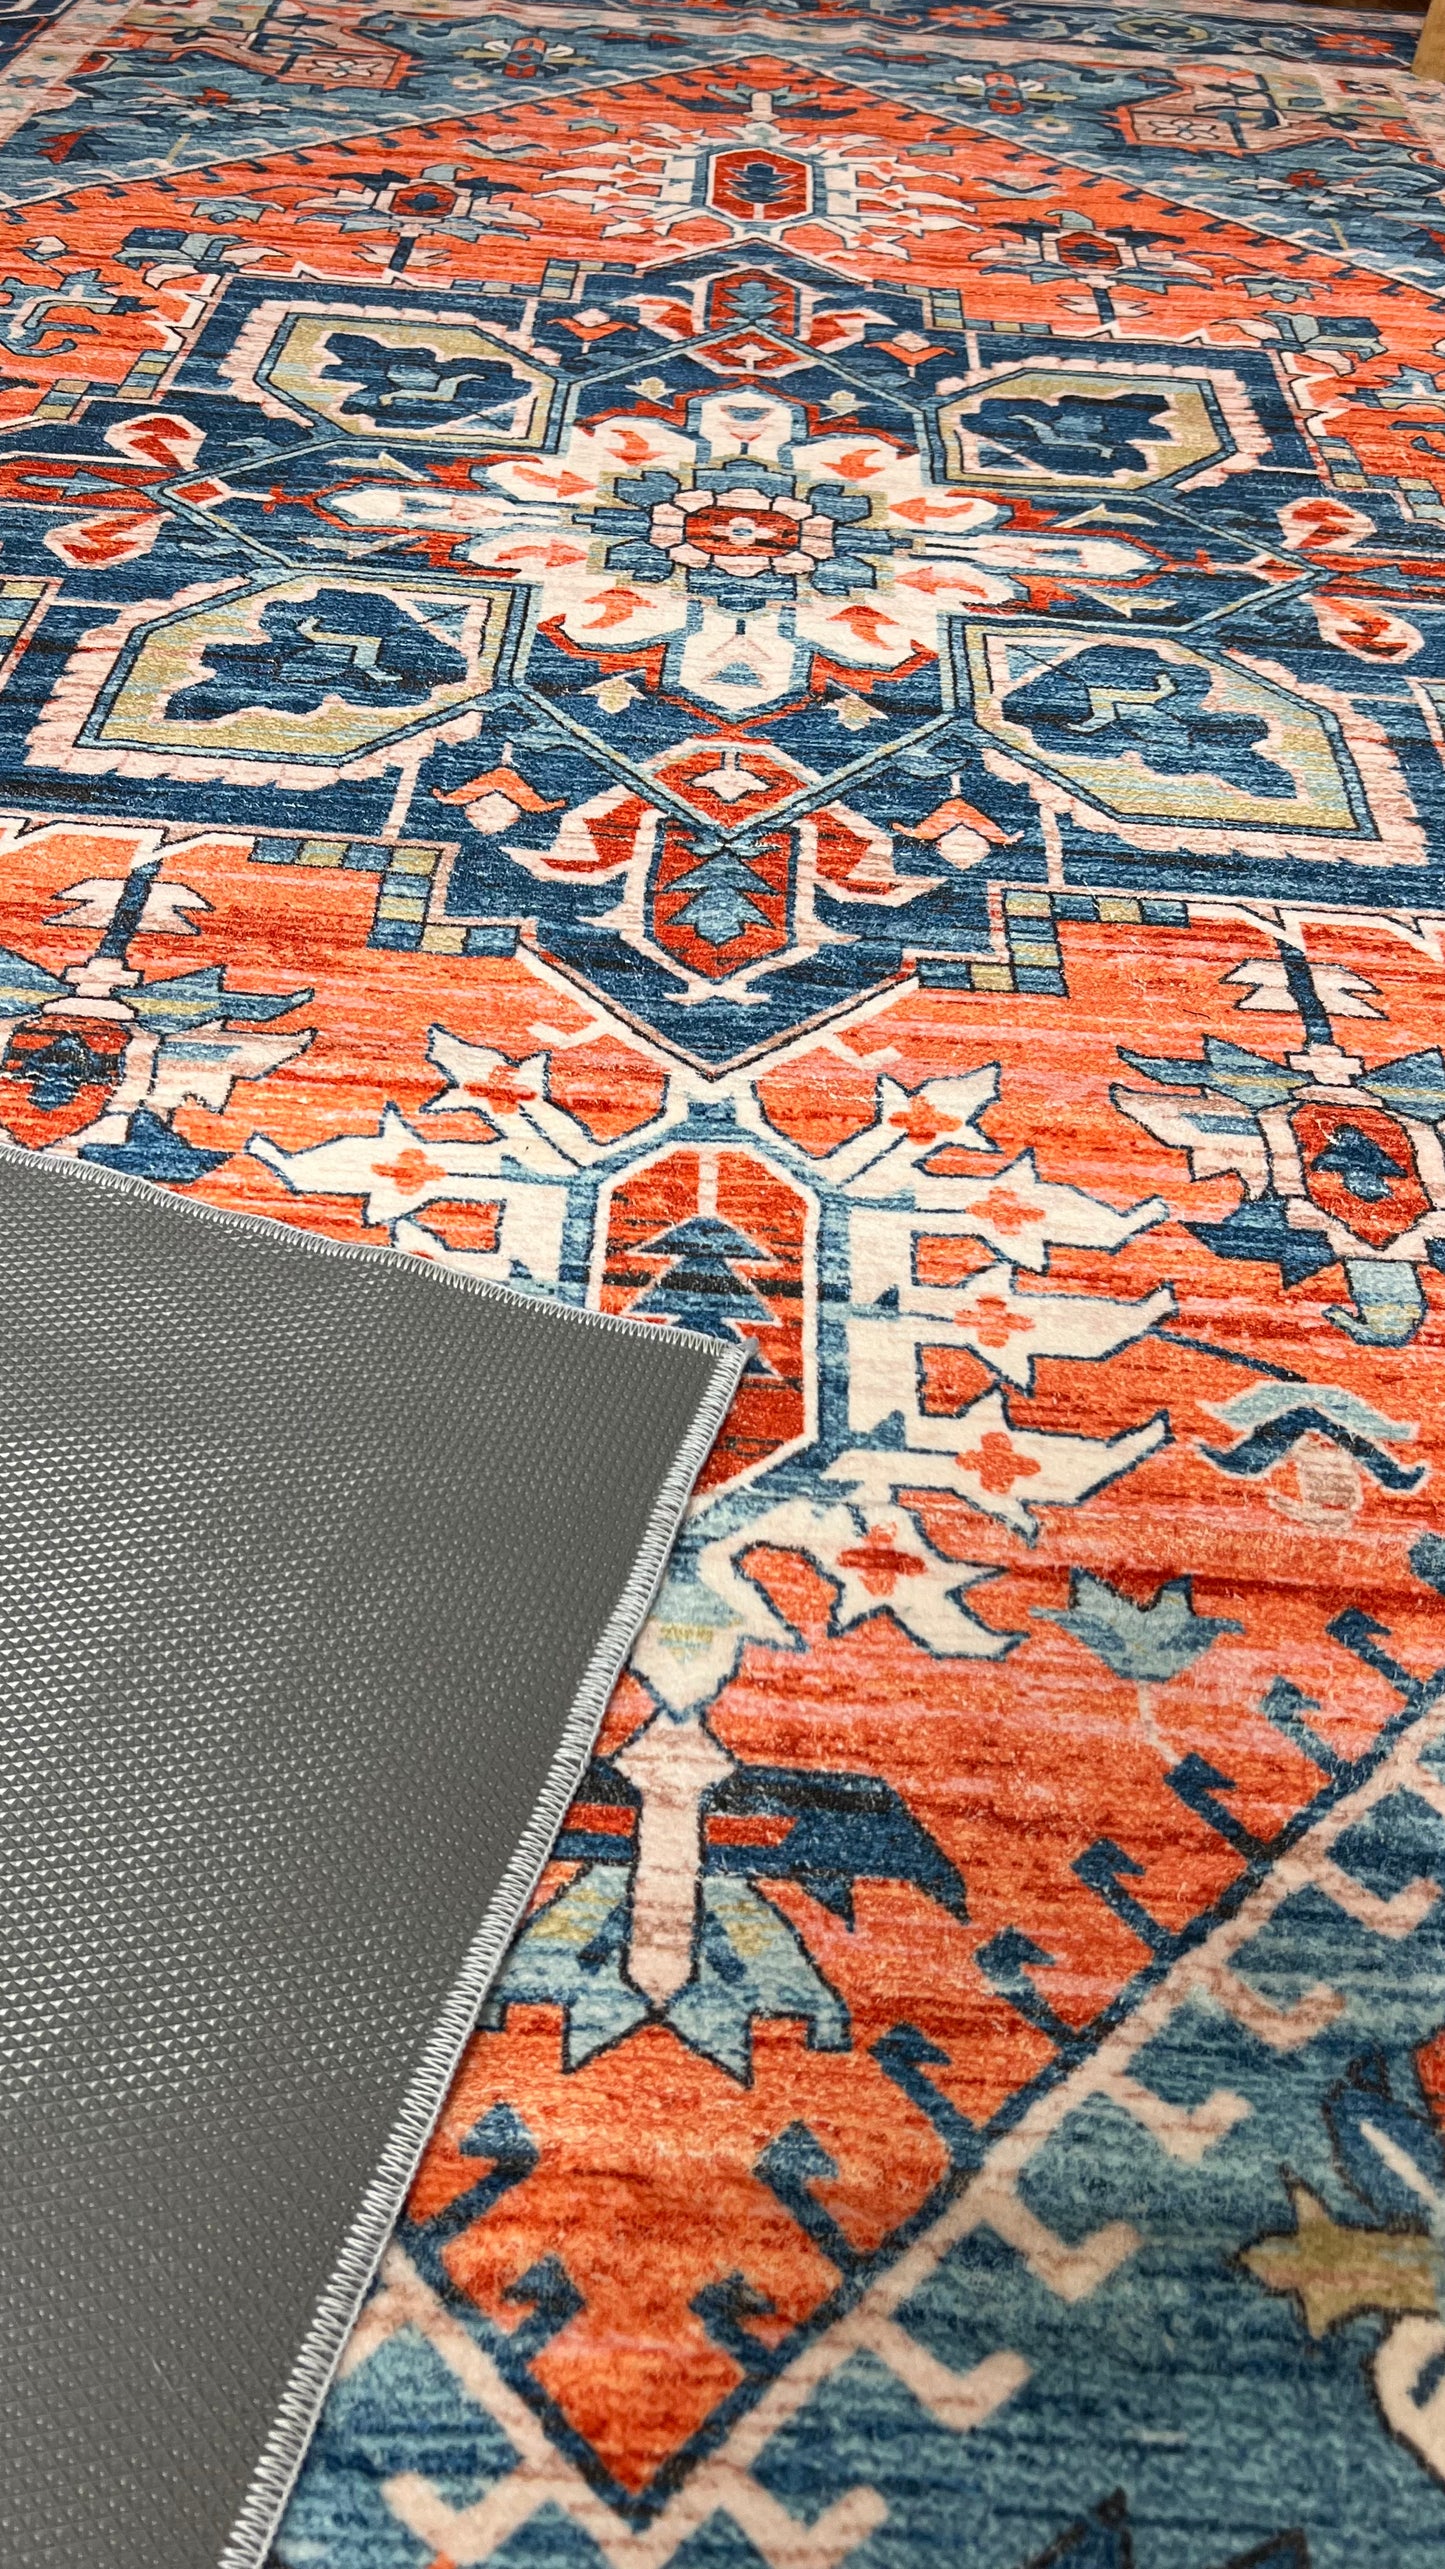 Clean Beauty: Dive into Stylish Machine-Washable Persian Rugs